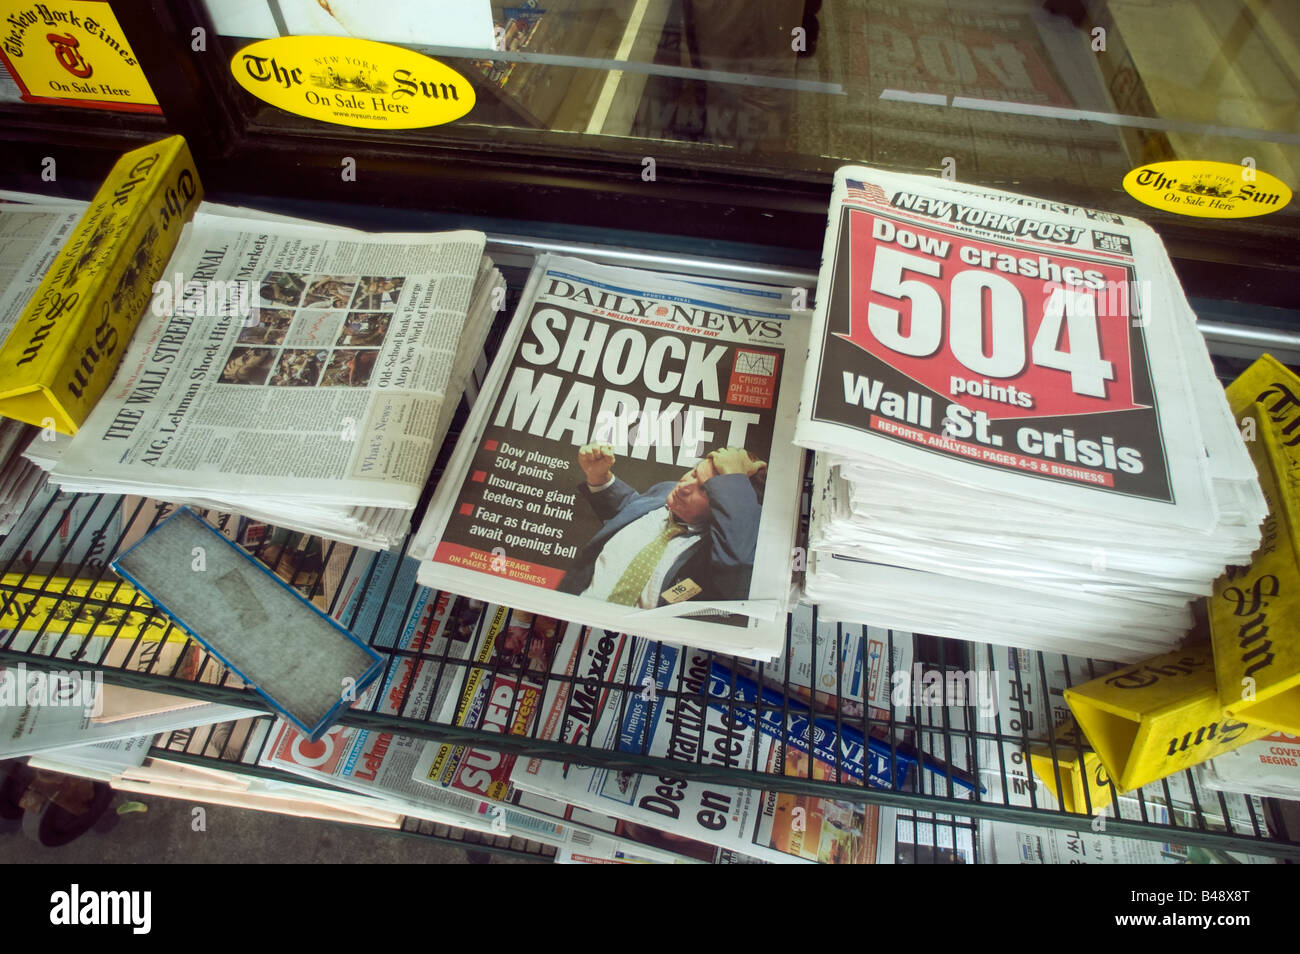 Newspapers on a news stand in New York Stock Photo